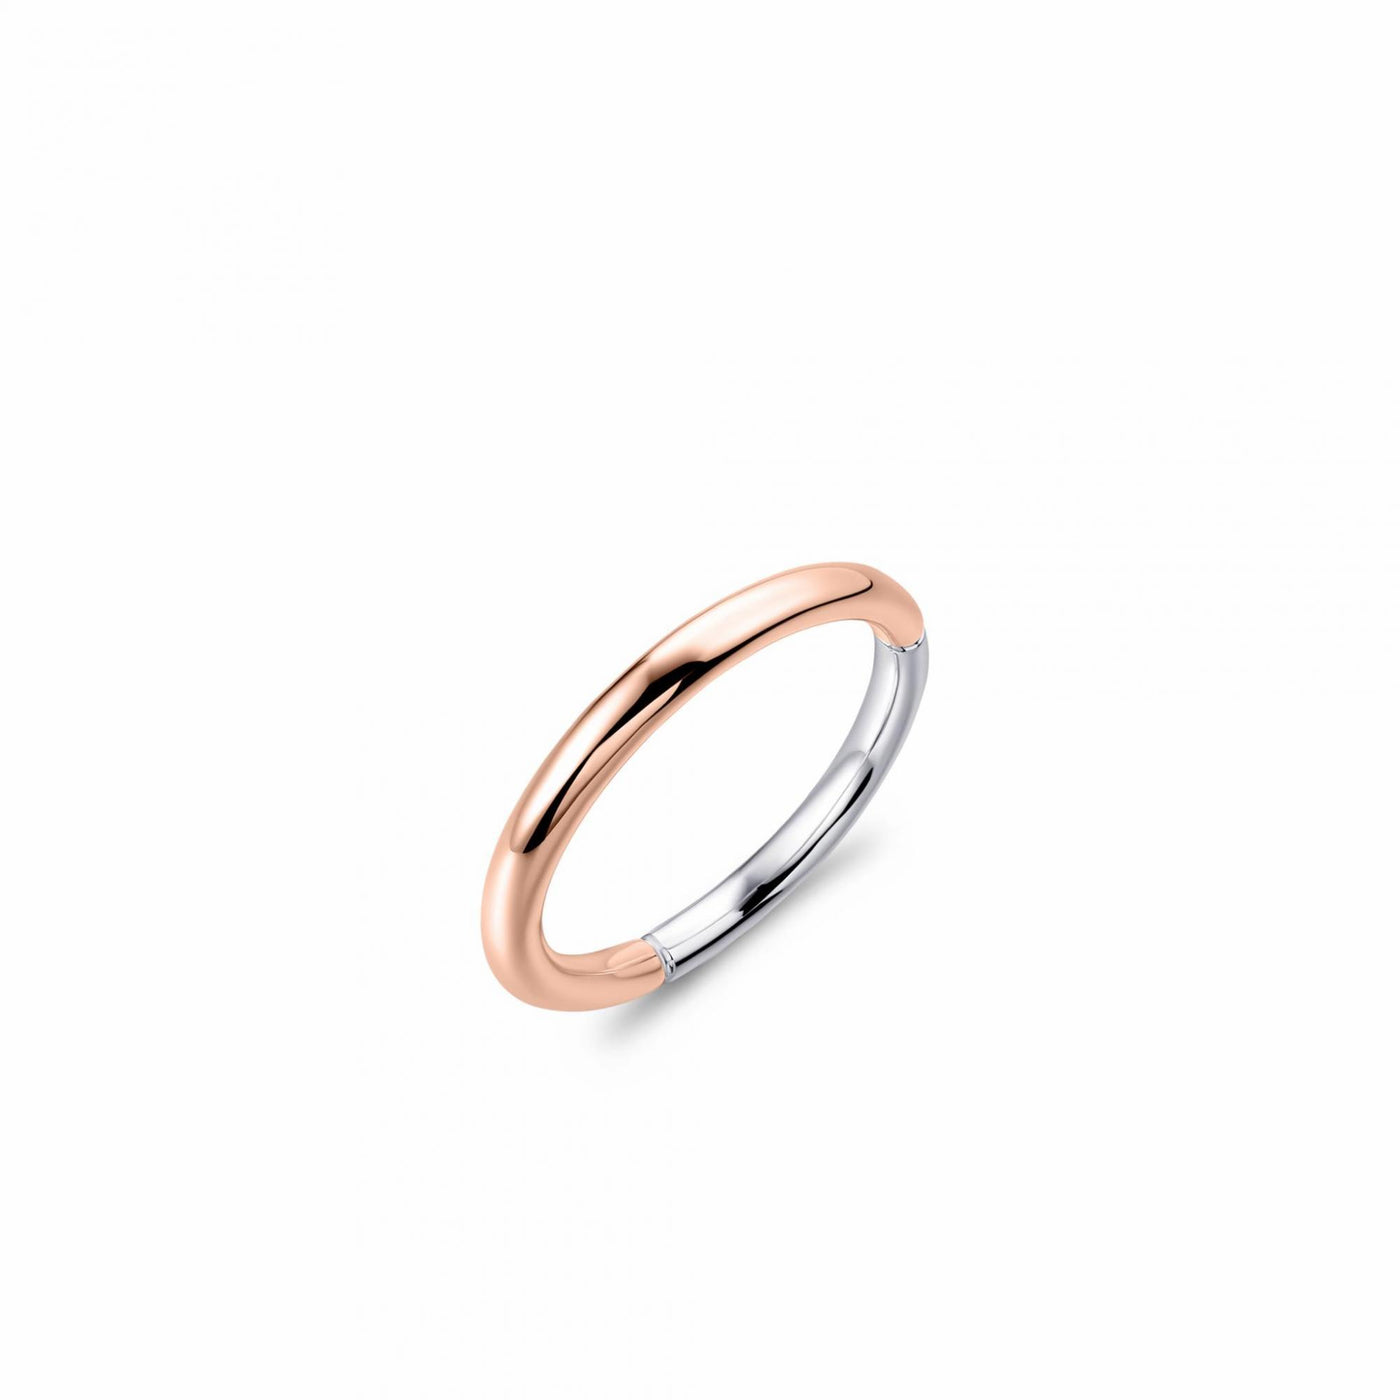 Gisser Sterling Silver Ring - 2mm Band Rose Gold Plated